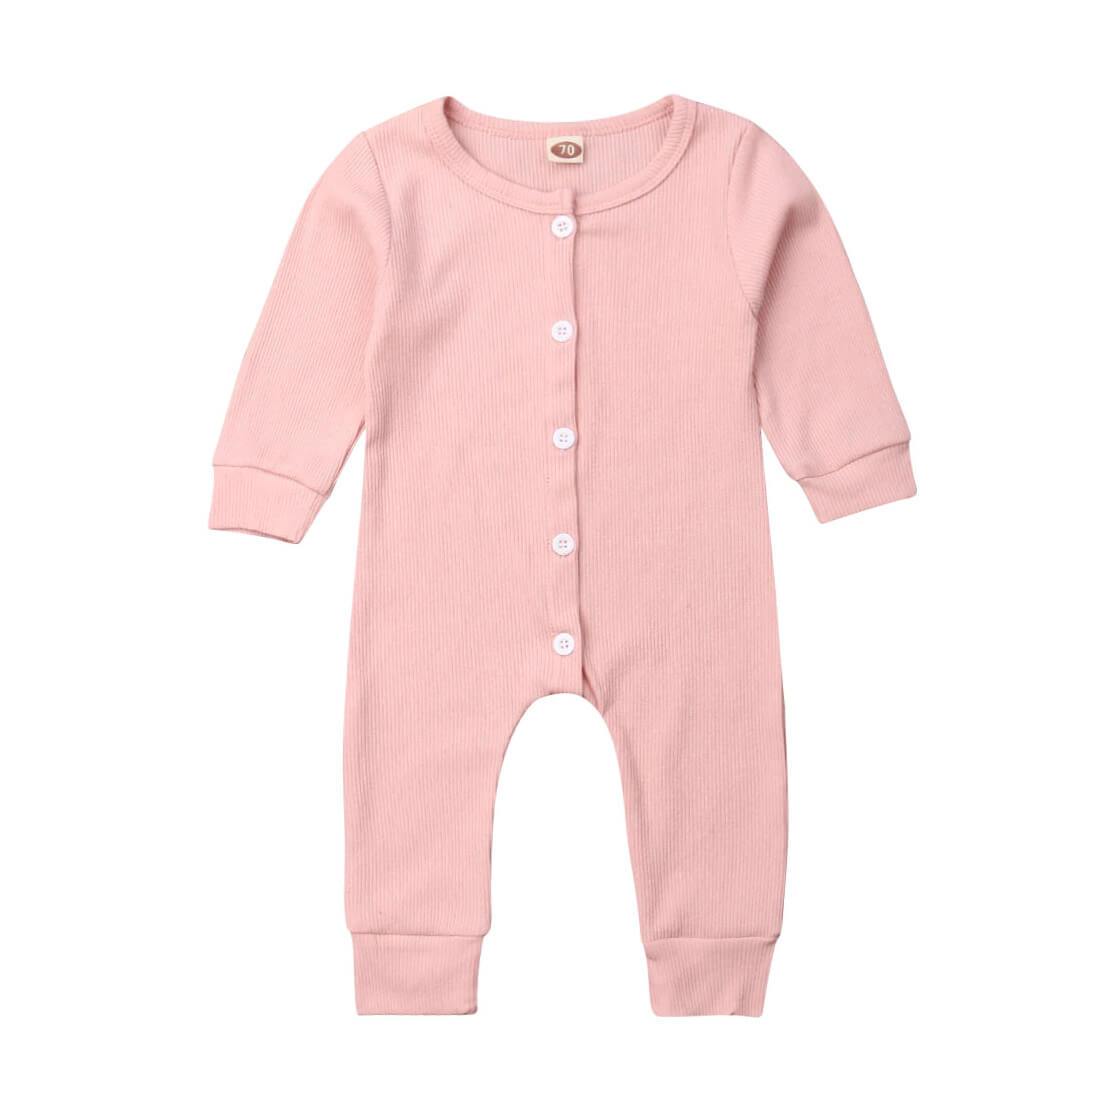 Long Sleeve Solid Baby Jumpsuit Pink 9-12 M 